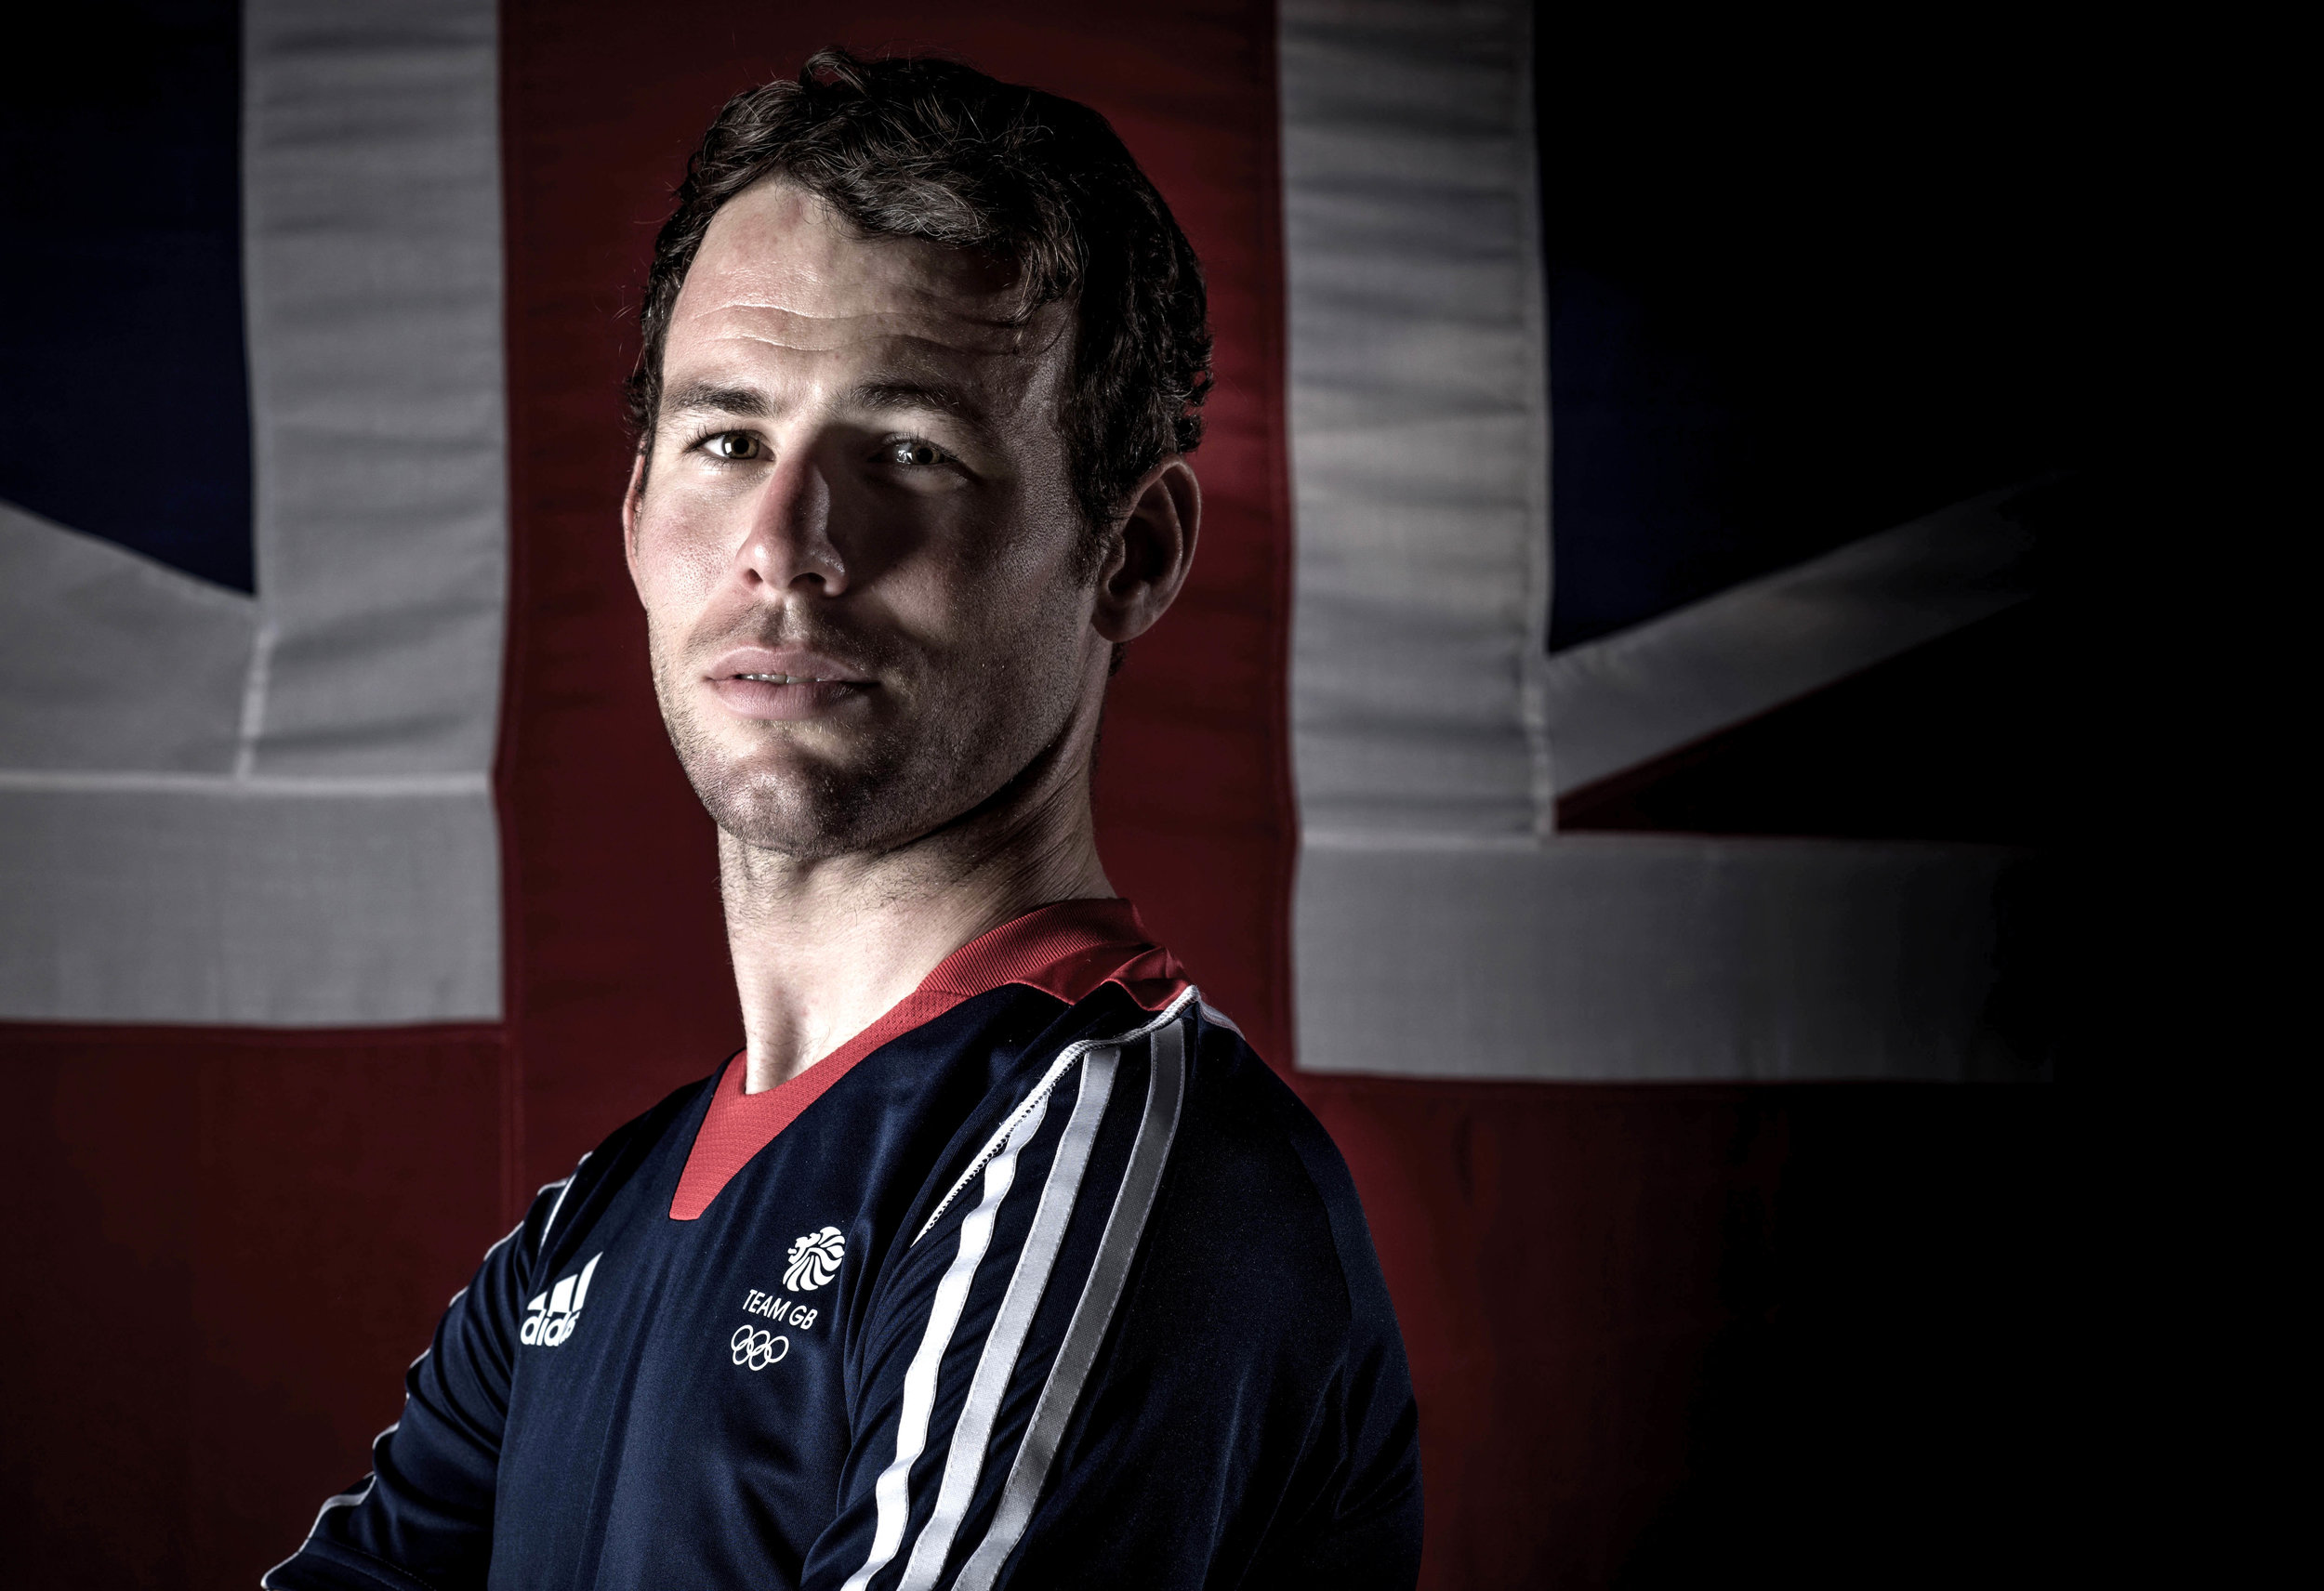  Mark Cavendish of Team GB  the Team GB track cyclists selected to ride in the Rio 2016 Olympic Games on June 24, 2016 in Manchester, England. PHOTO CREDIT PAUL COOPER 